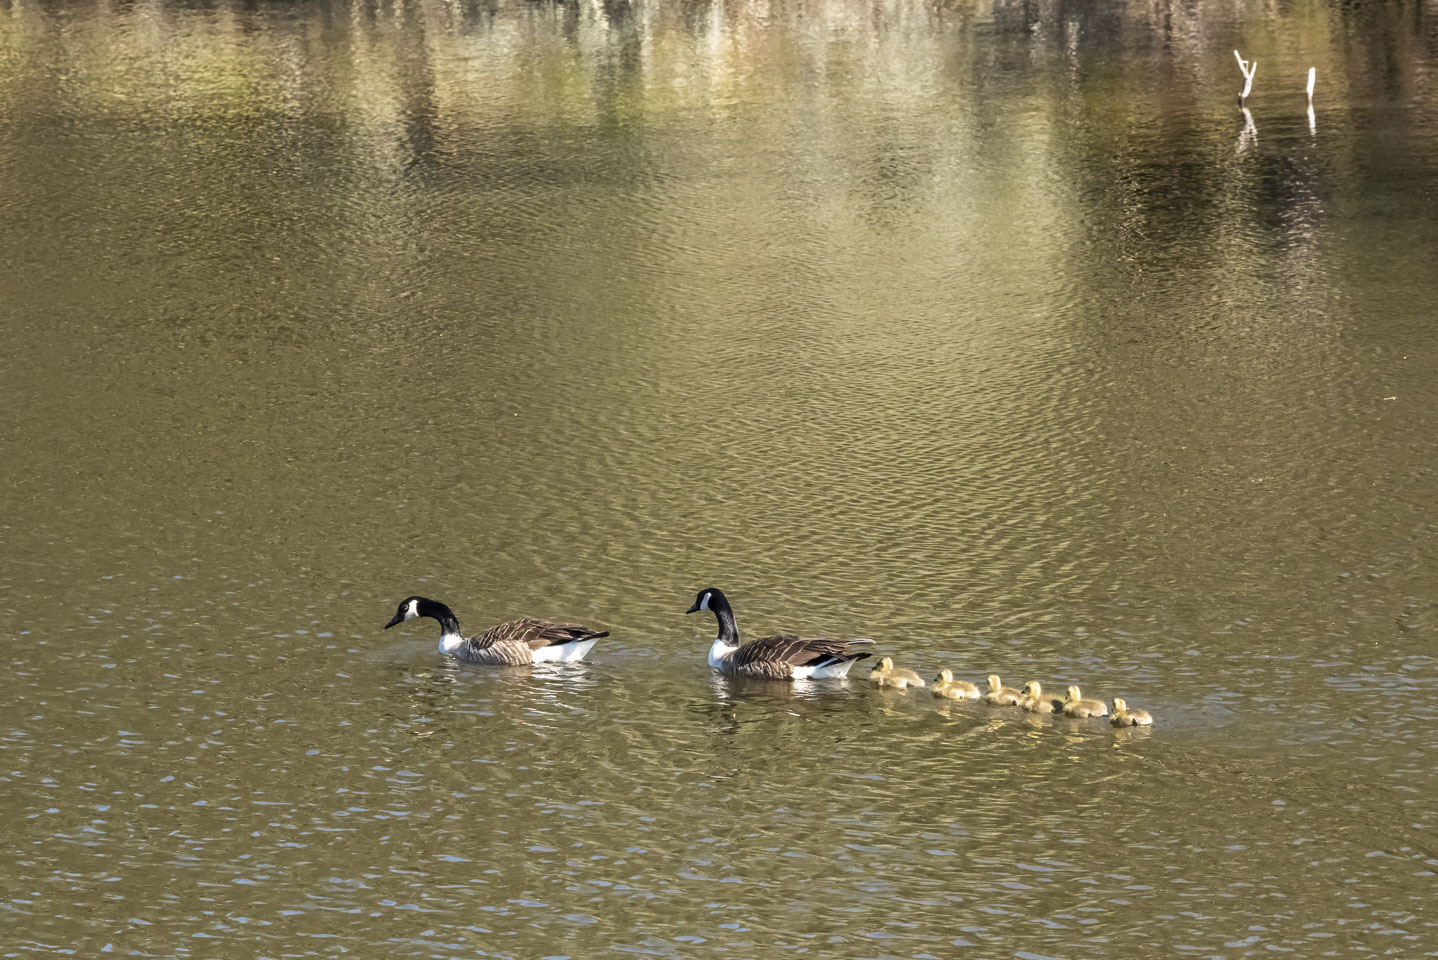 Two adult Canada Geese trailed by goslings